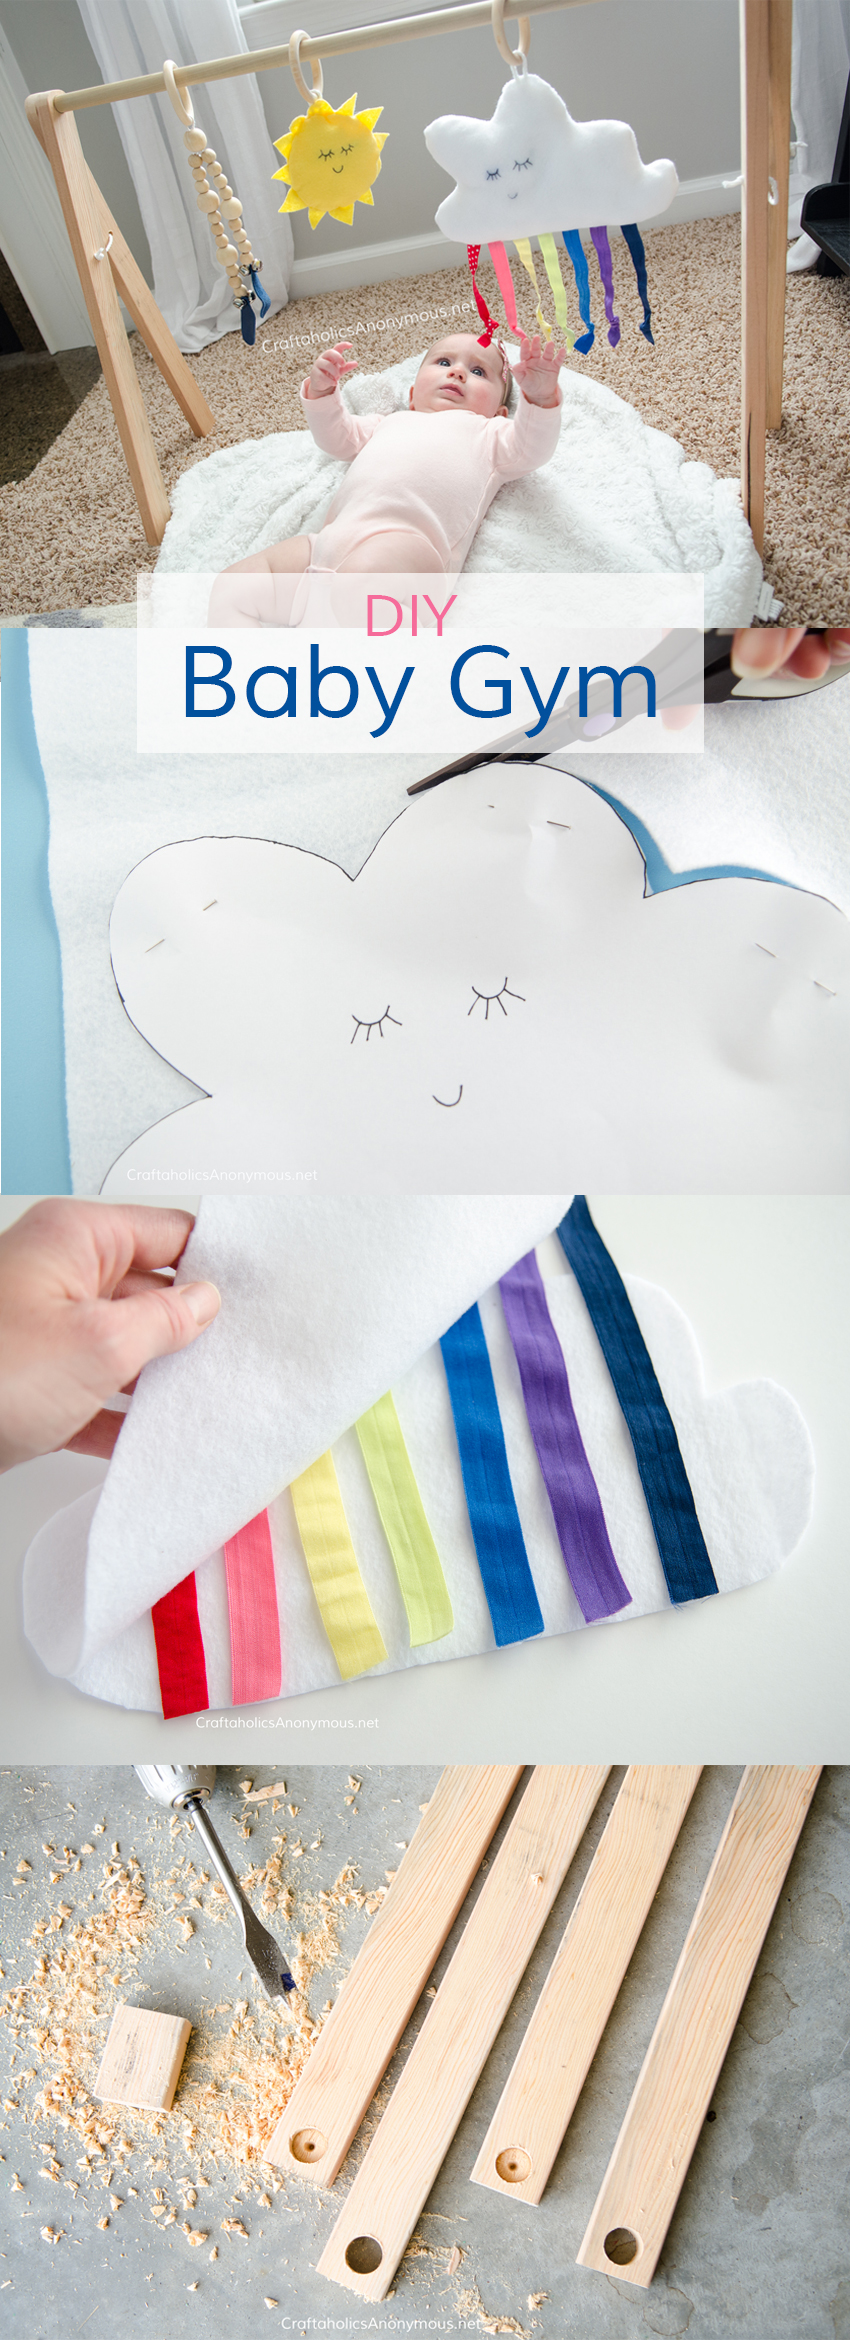 DIY Baby Gym tutorial with Free Printable patterns for the Sleepy Rainbow Cloud, sun, and raindrop